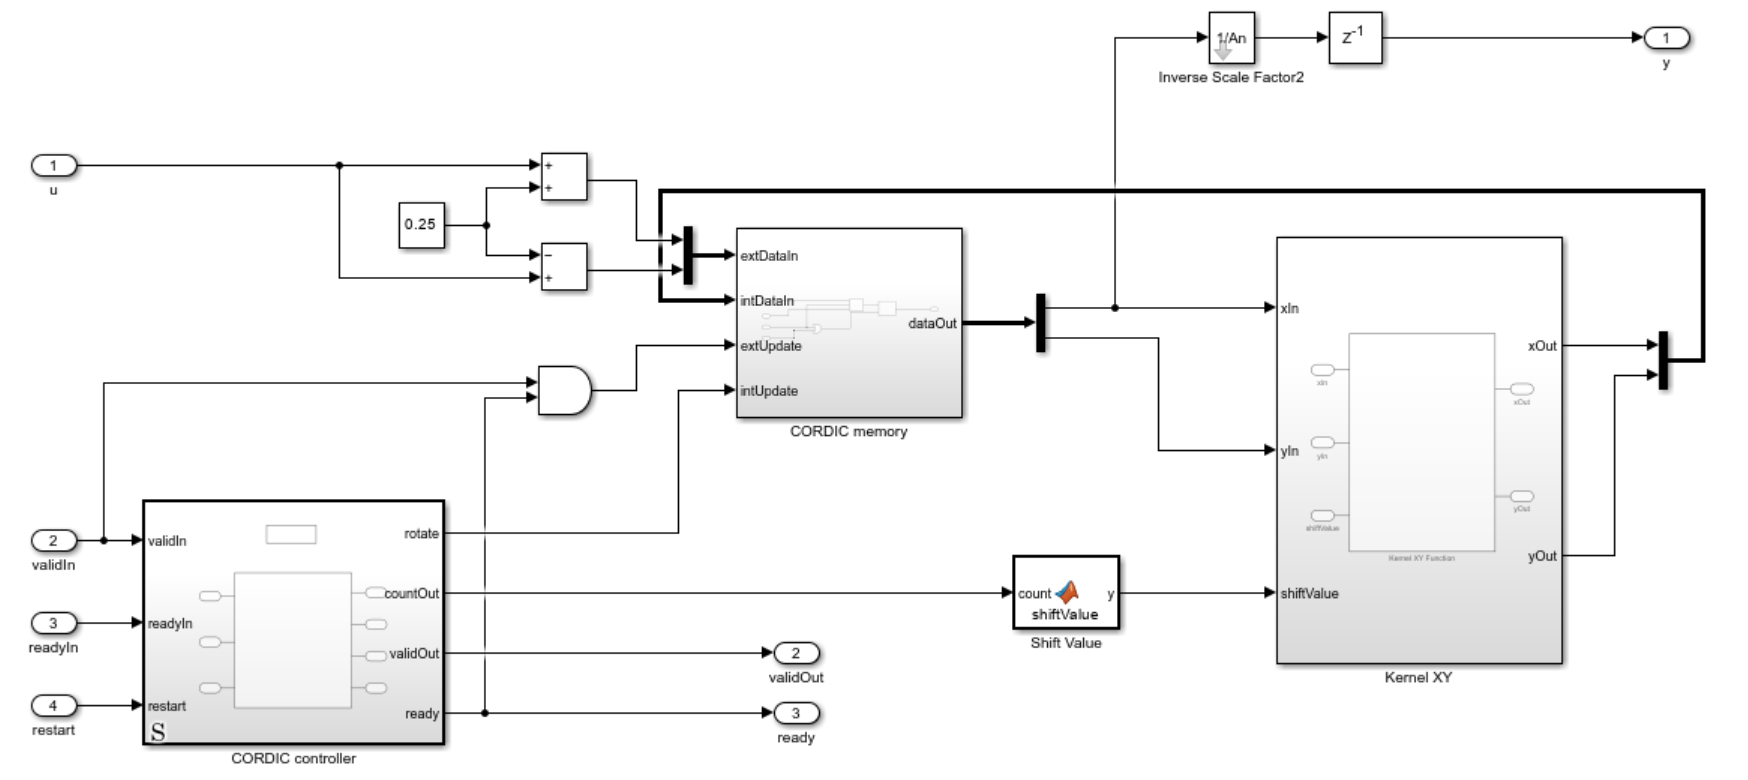 Screenshot of the Simulink model for the CORDIC Square Root Resource-Shared block.